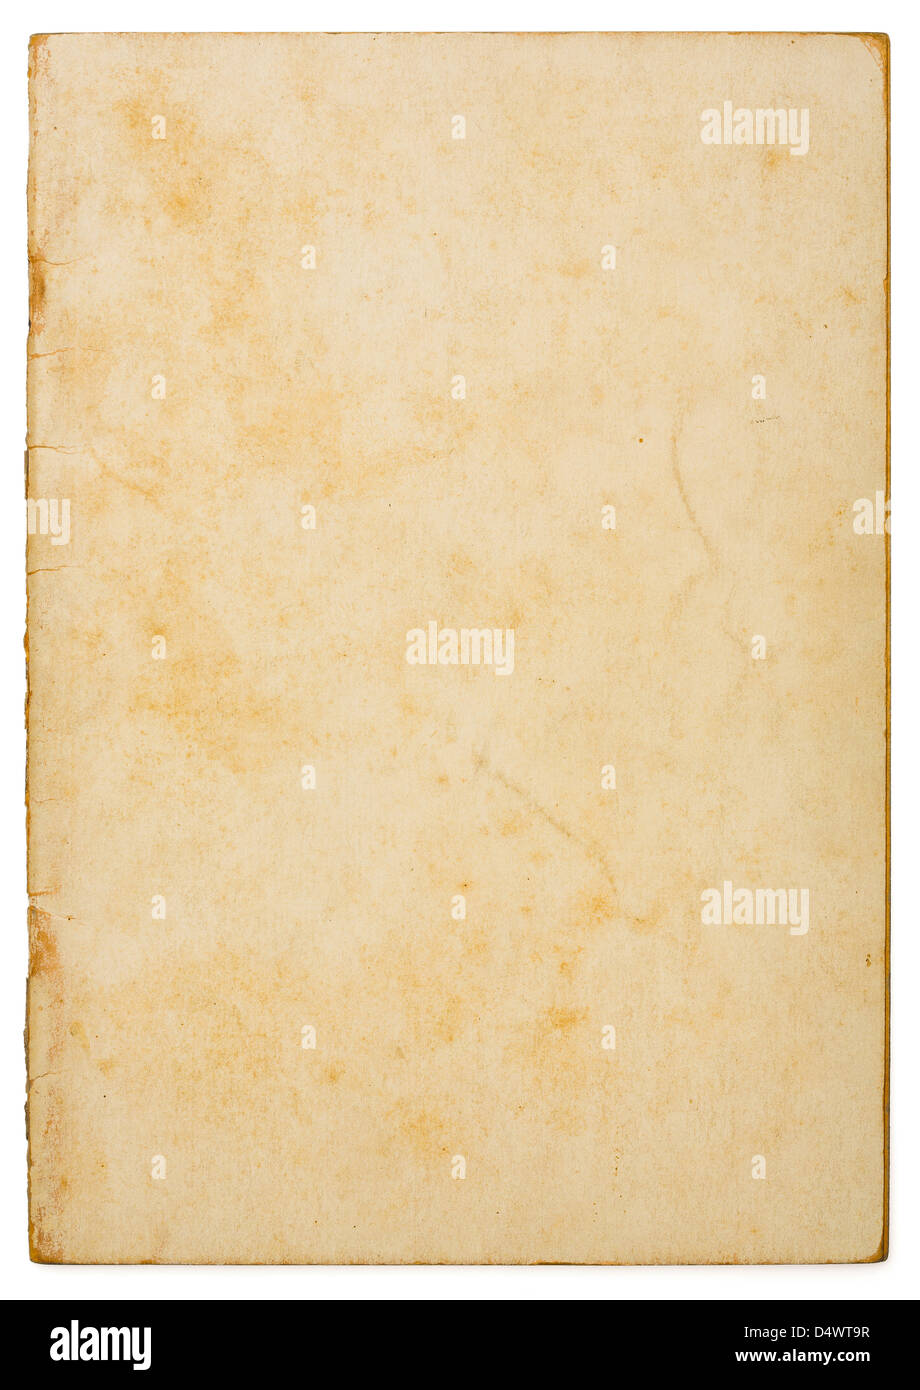 Dirty and weathered old paper texture background Stock Photo